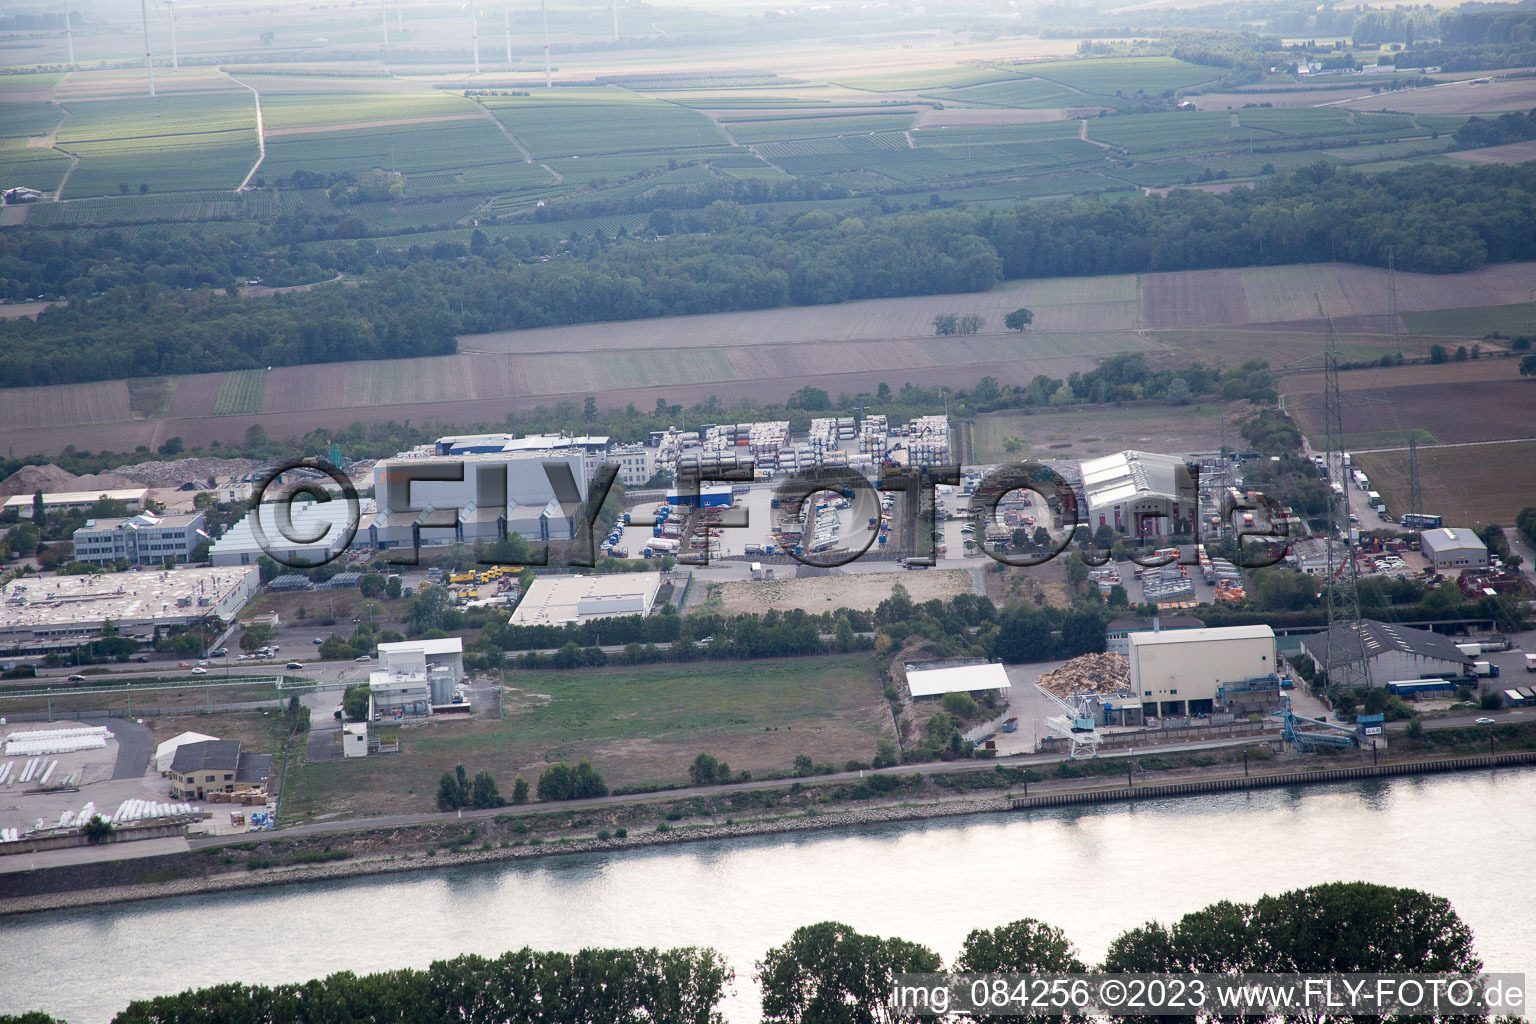 Oblique view of Industrial area N from the east in Worms in the state Rhineland-Palatinate, Germany